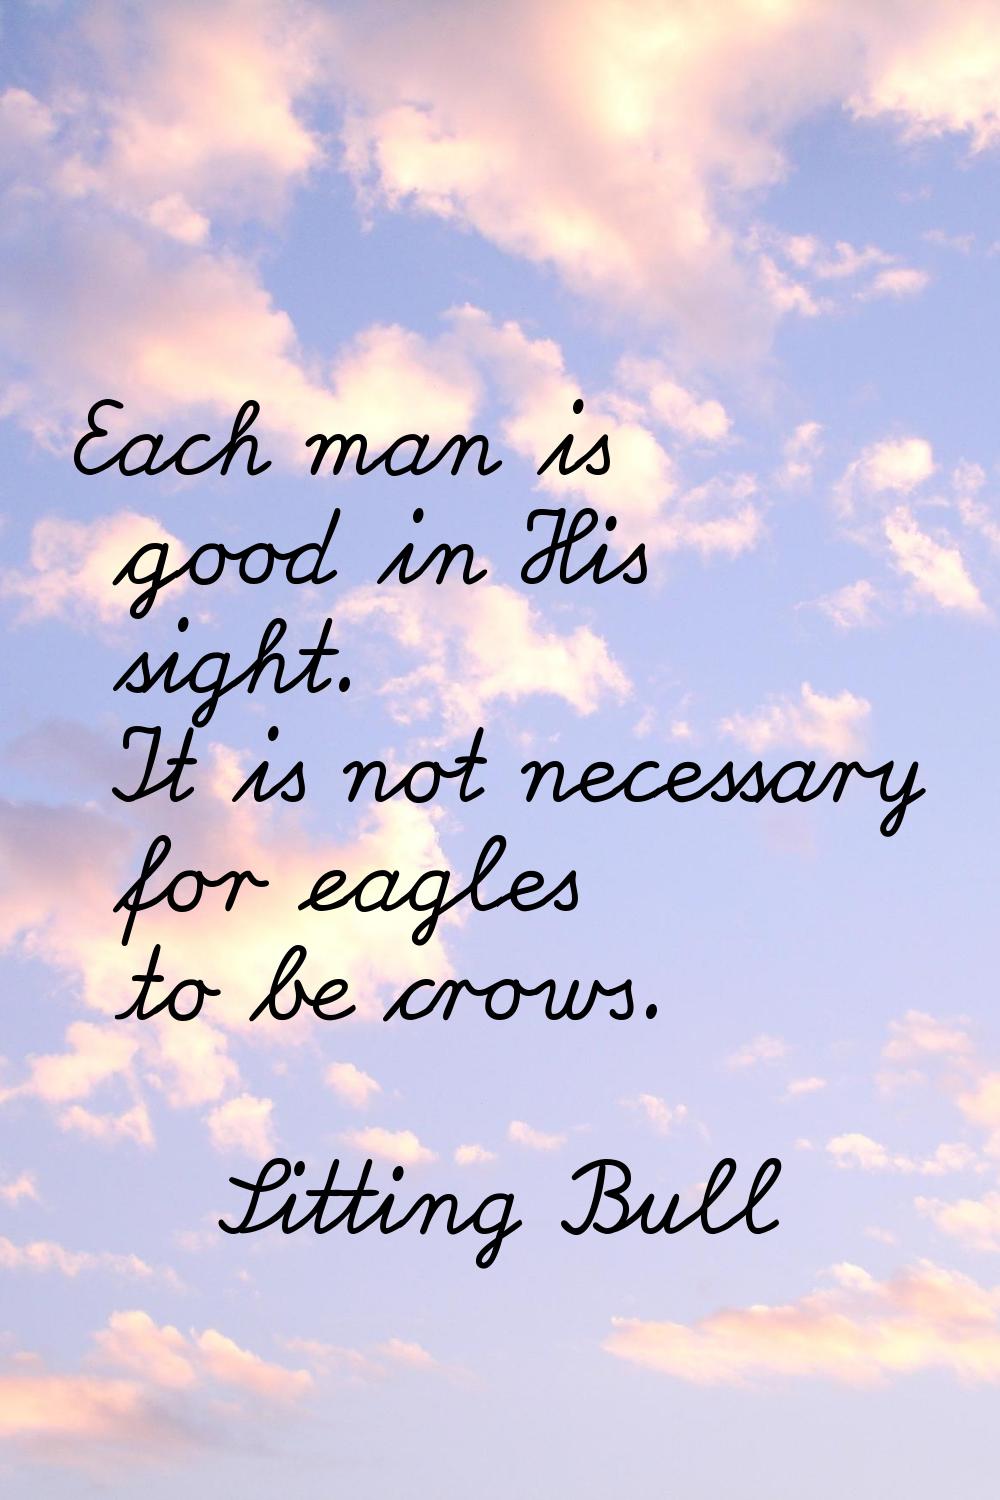 Each man is good in His sight. It is not necessary for eagles to be crows.